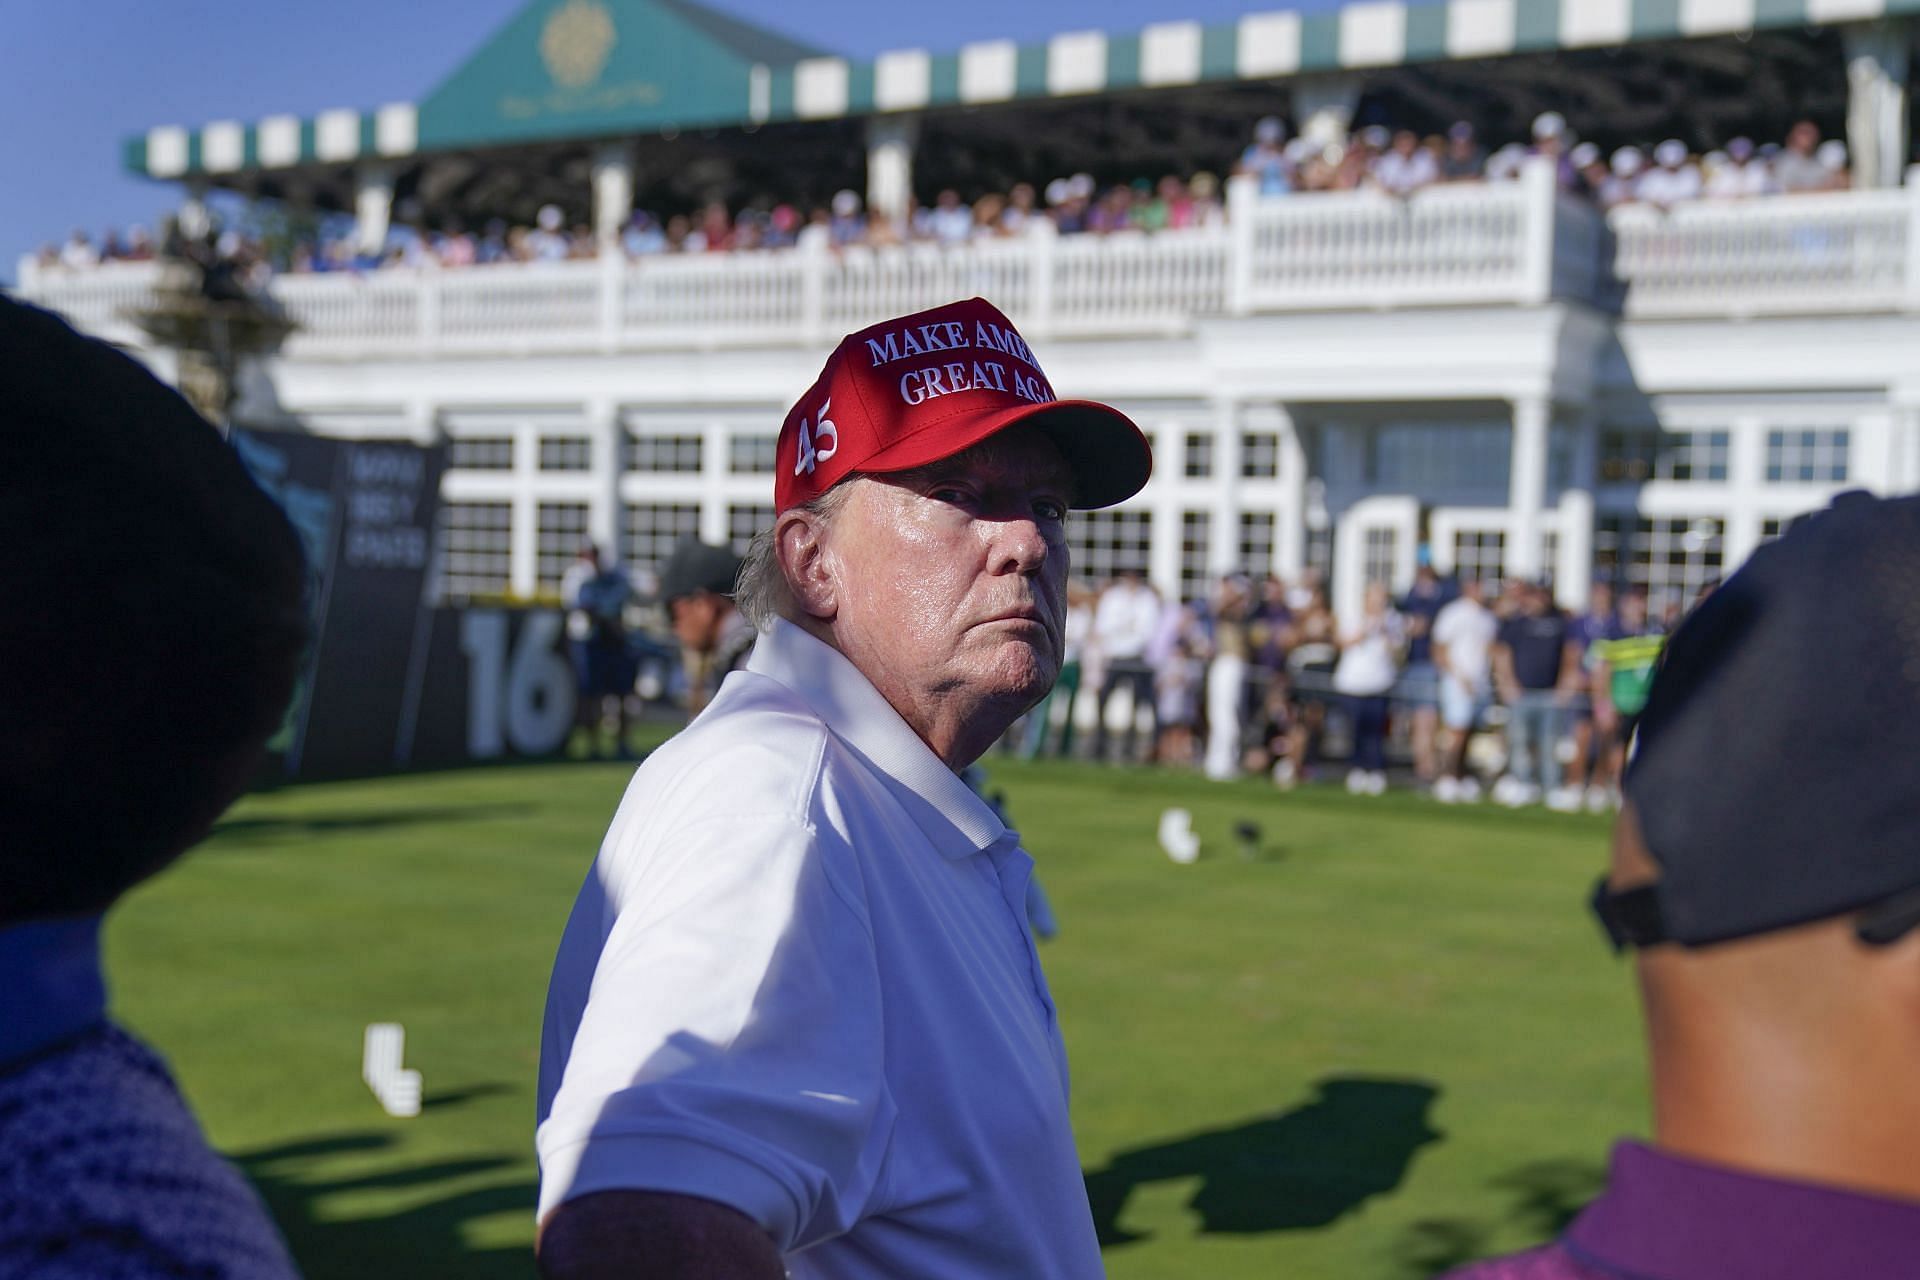 Donald Trump was not present at the Team Championship Pro-Am at Doral, Miami